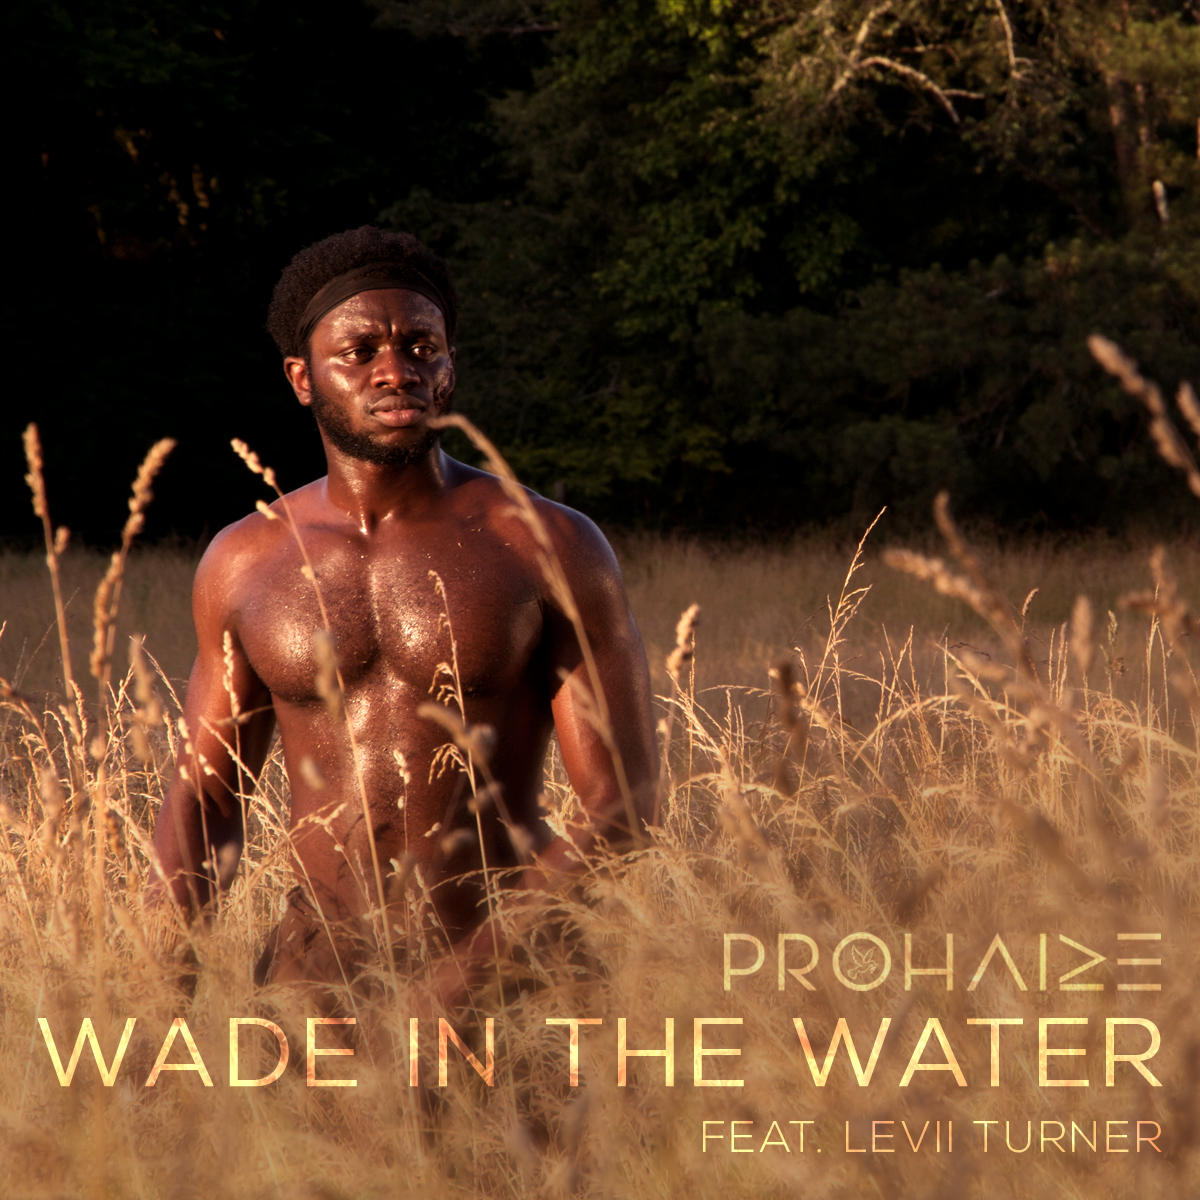 Prohaize & Levii Turner Break The Chains In “Wade In The Water” Video